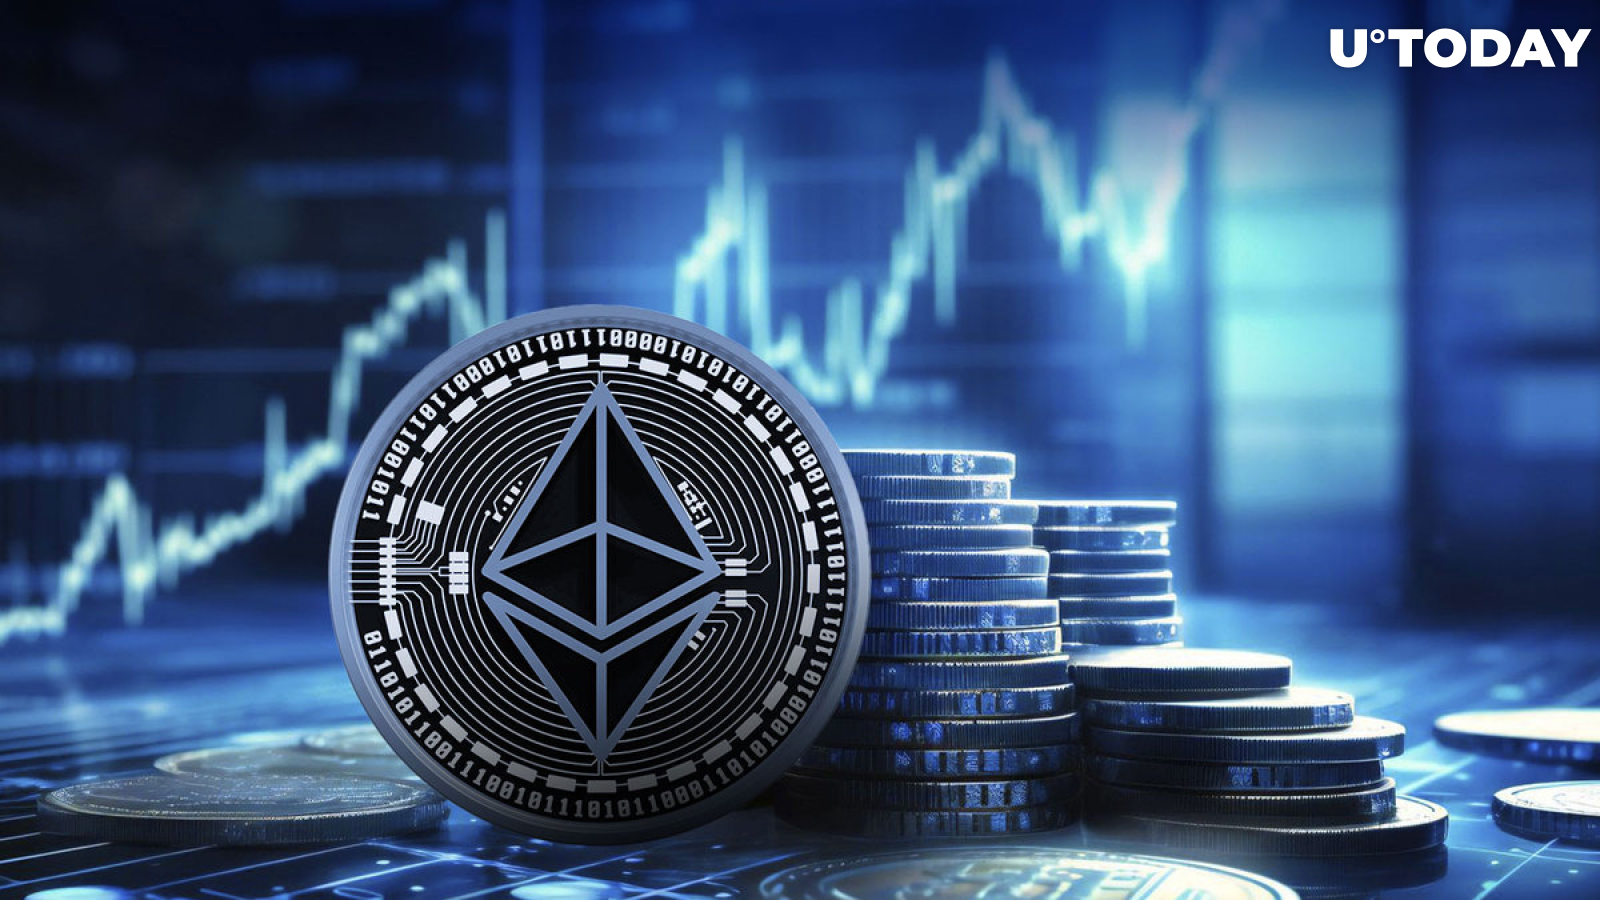 Ethereum (ETH) Price to Reach $2,500 on This Date, But Here's Catch